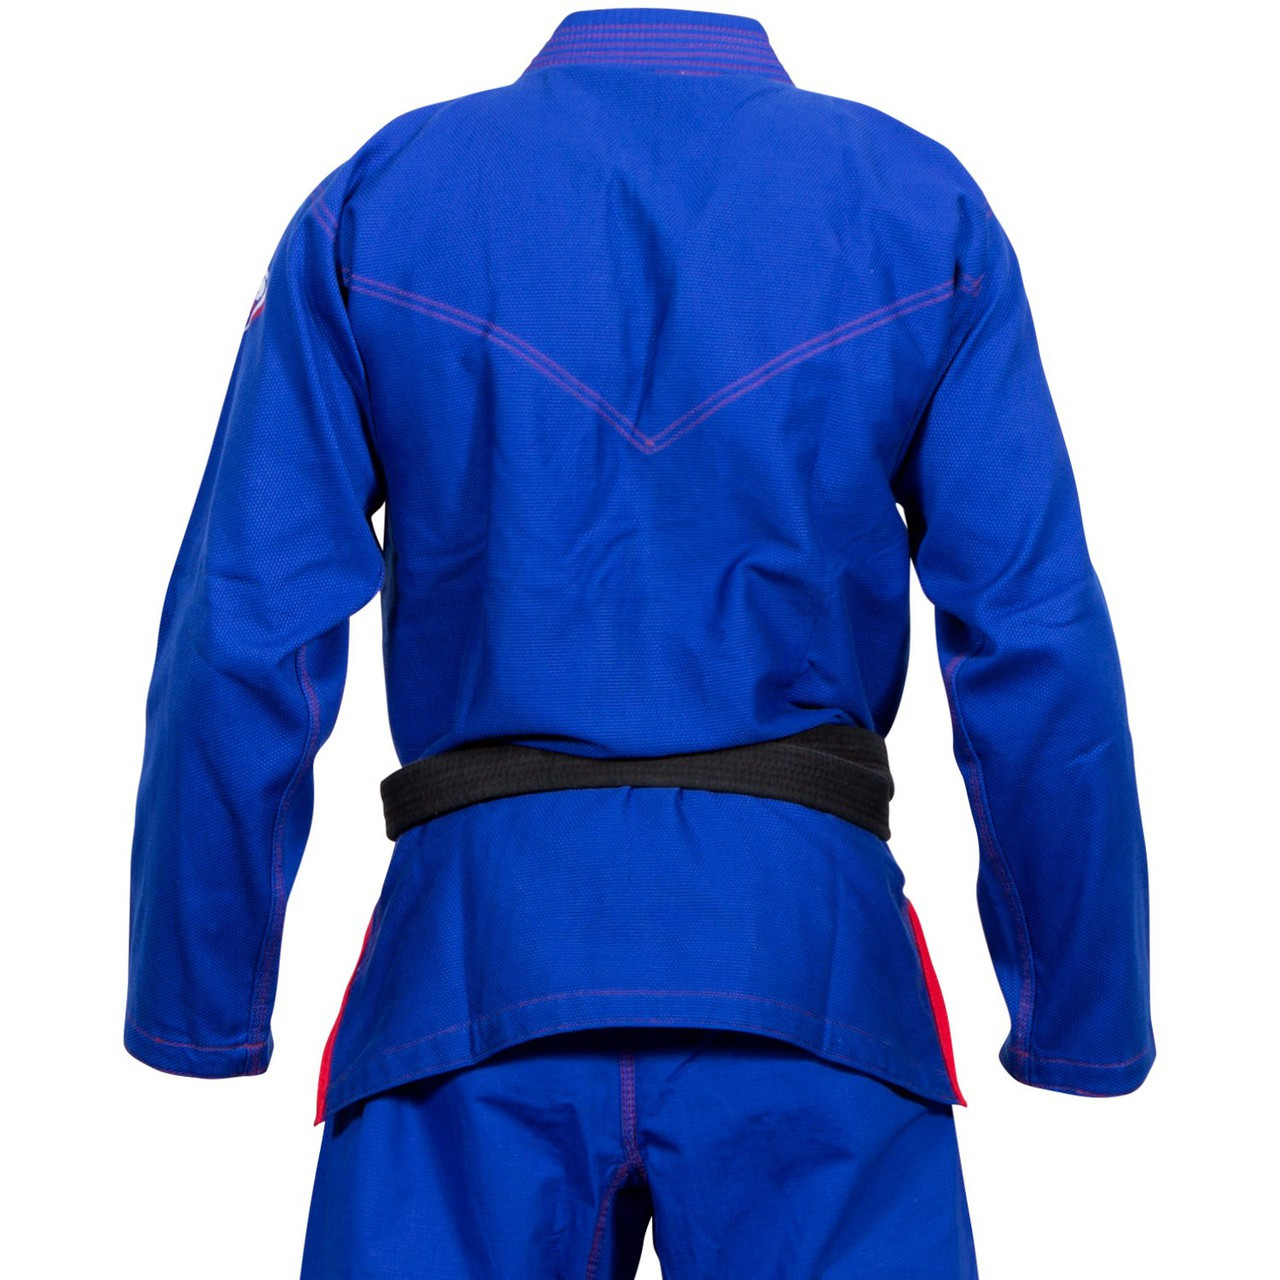 Back of the Venum Elite Light BJJ GI in Blue is now available at www.thejiujitsushop.com

Enjoy Free Shipping from The Jiu Jitsu Shop today! 